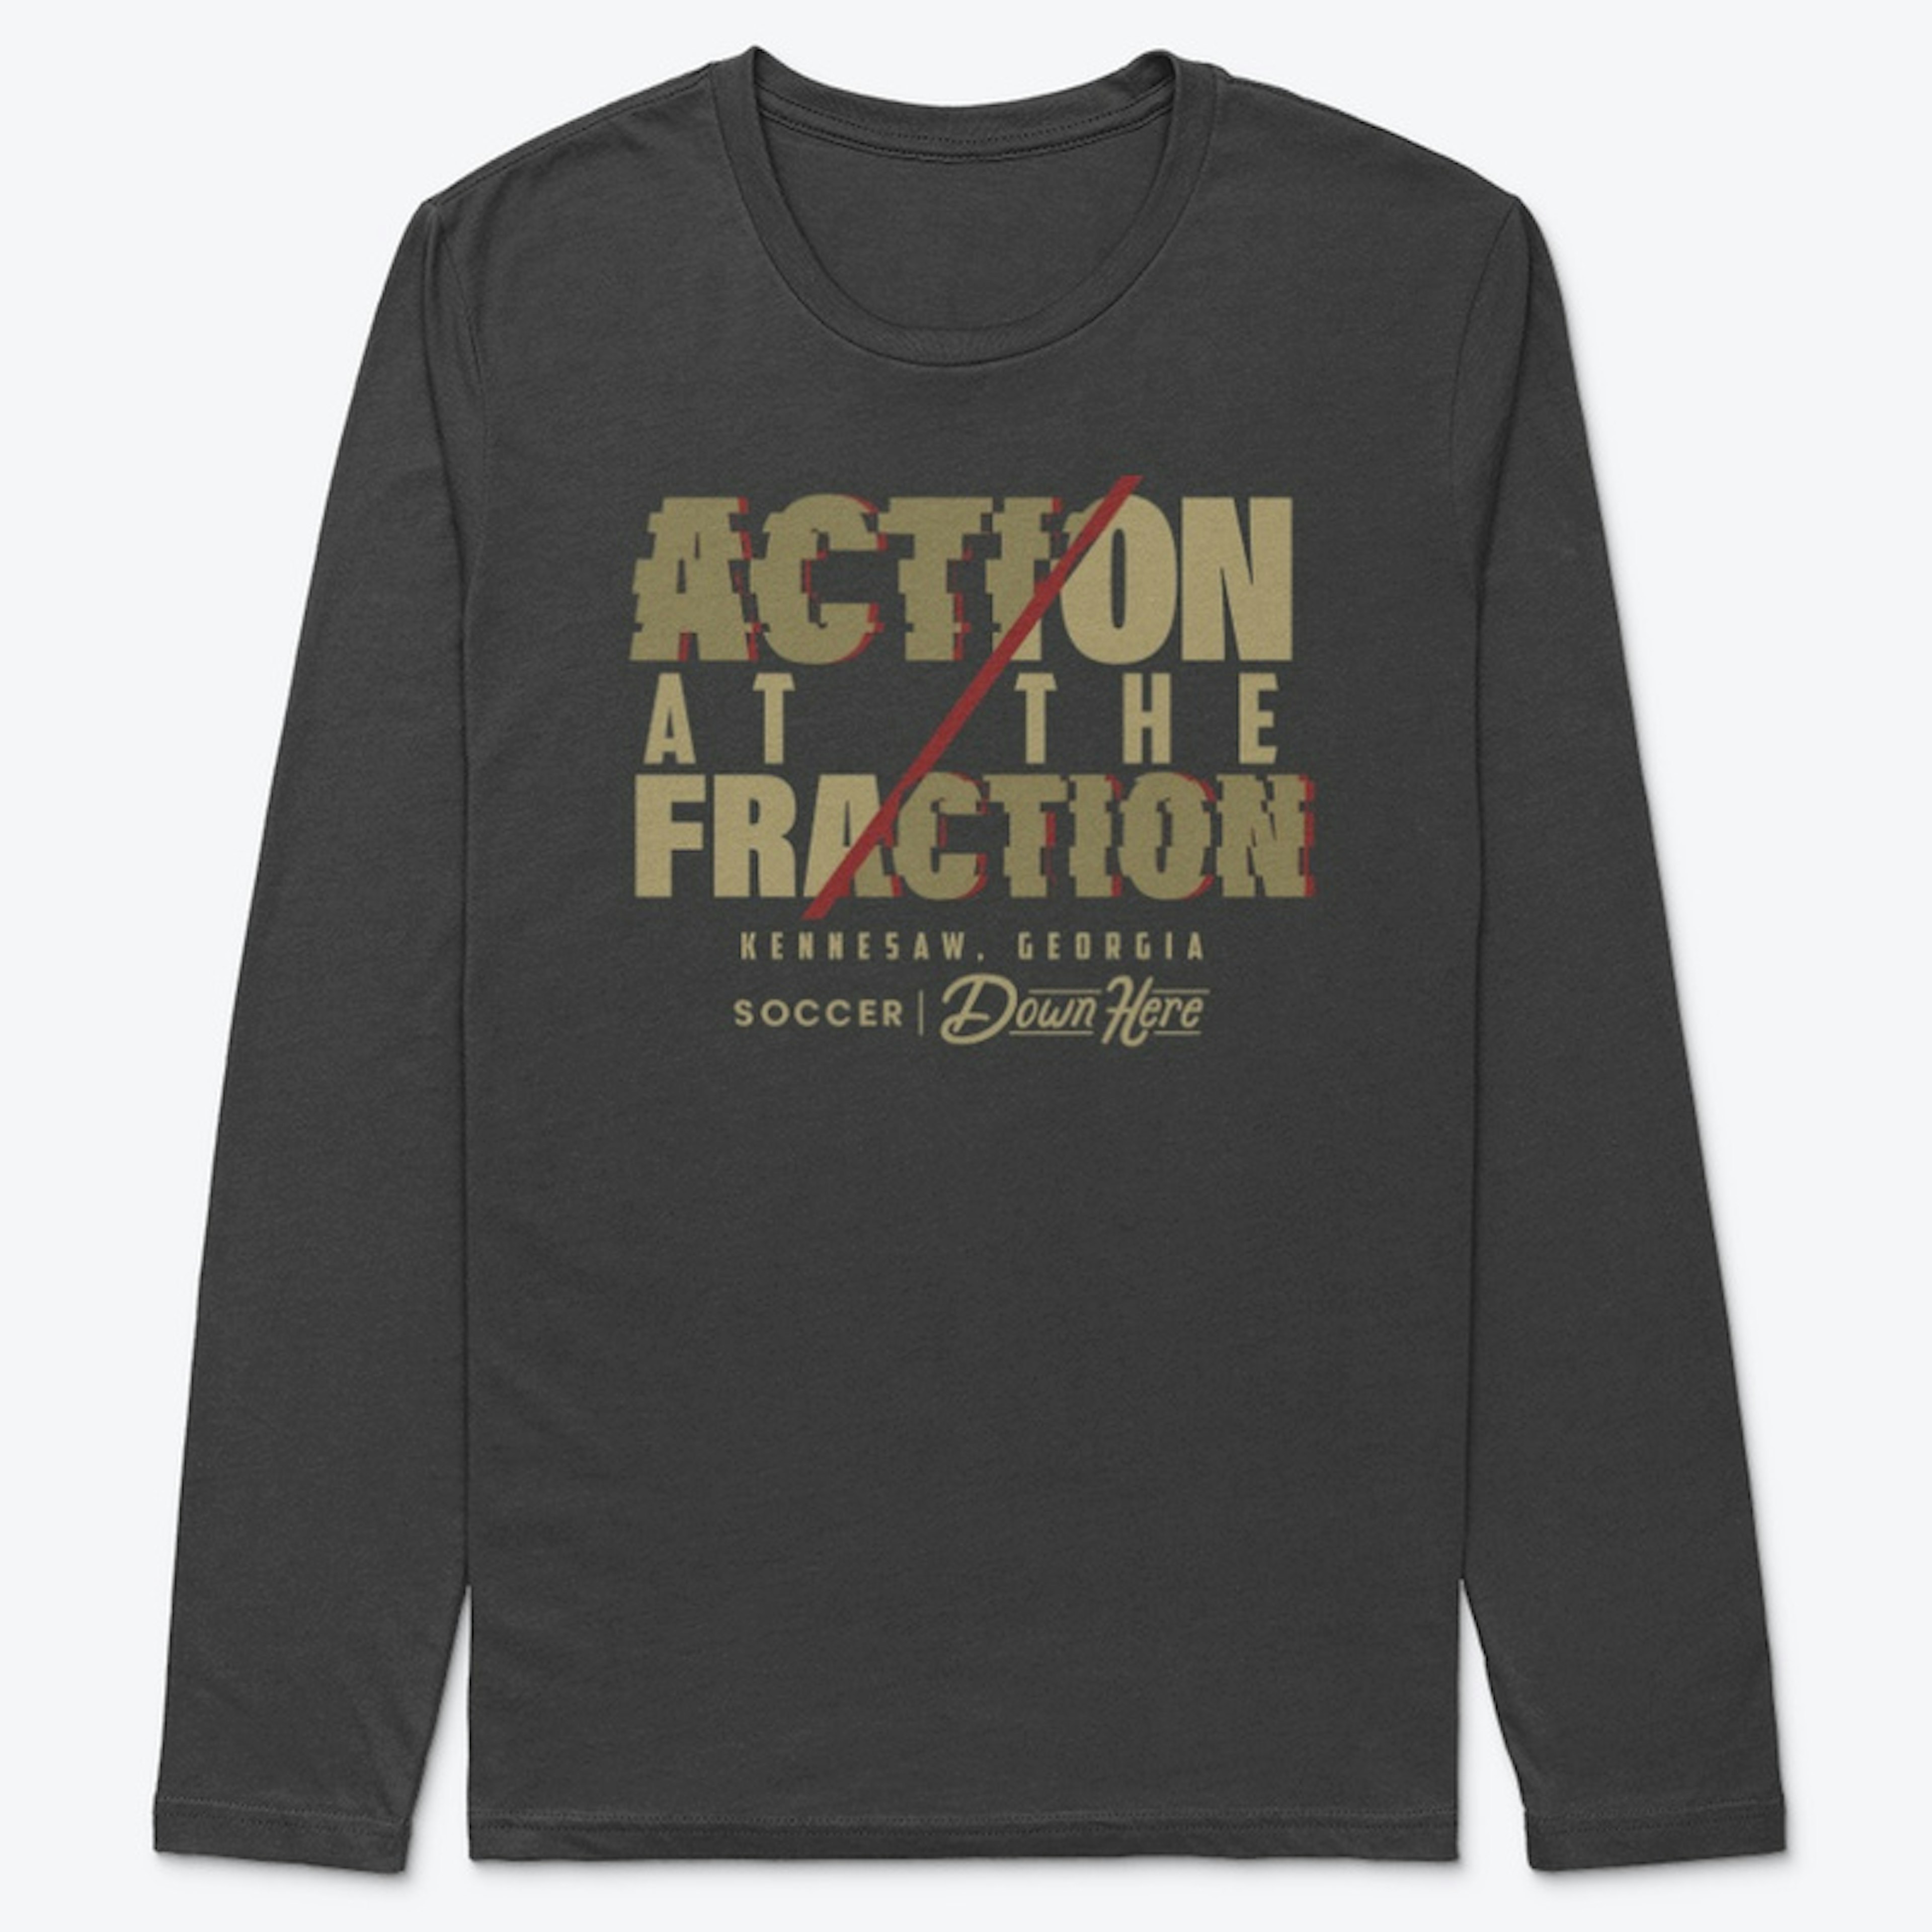 SDH: Action at the Fraction